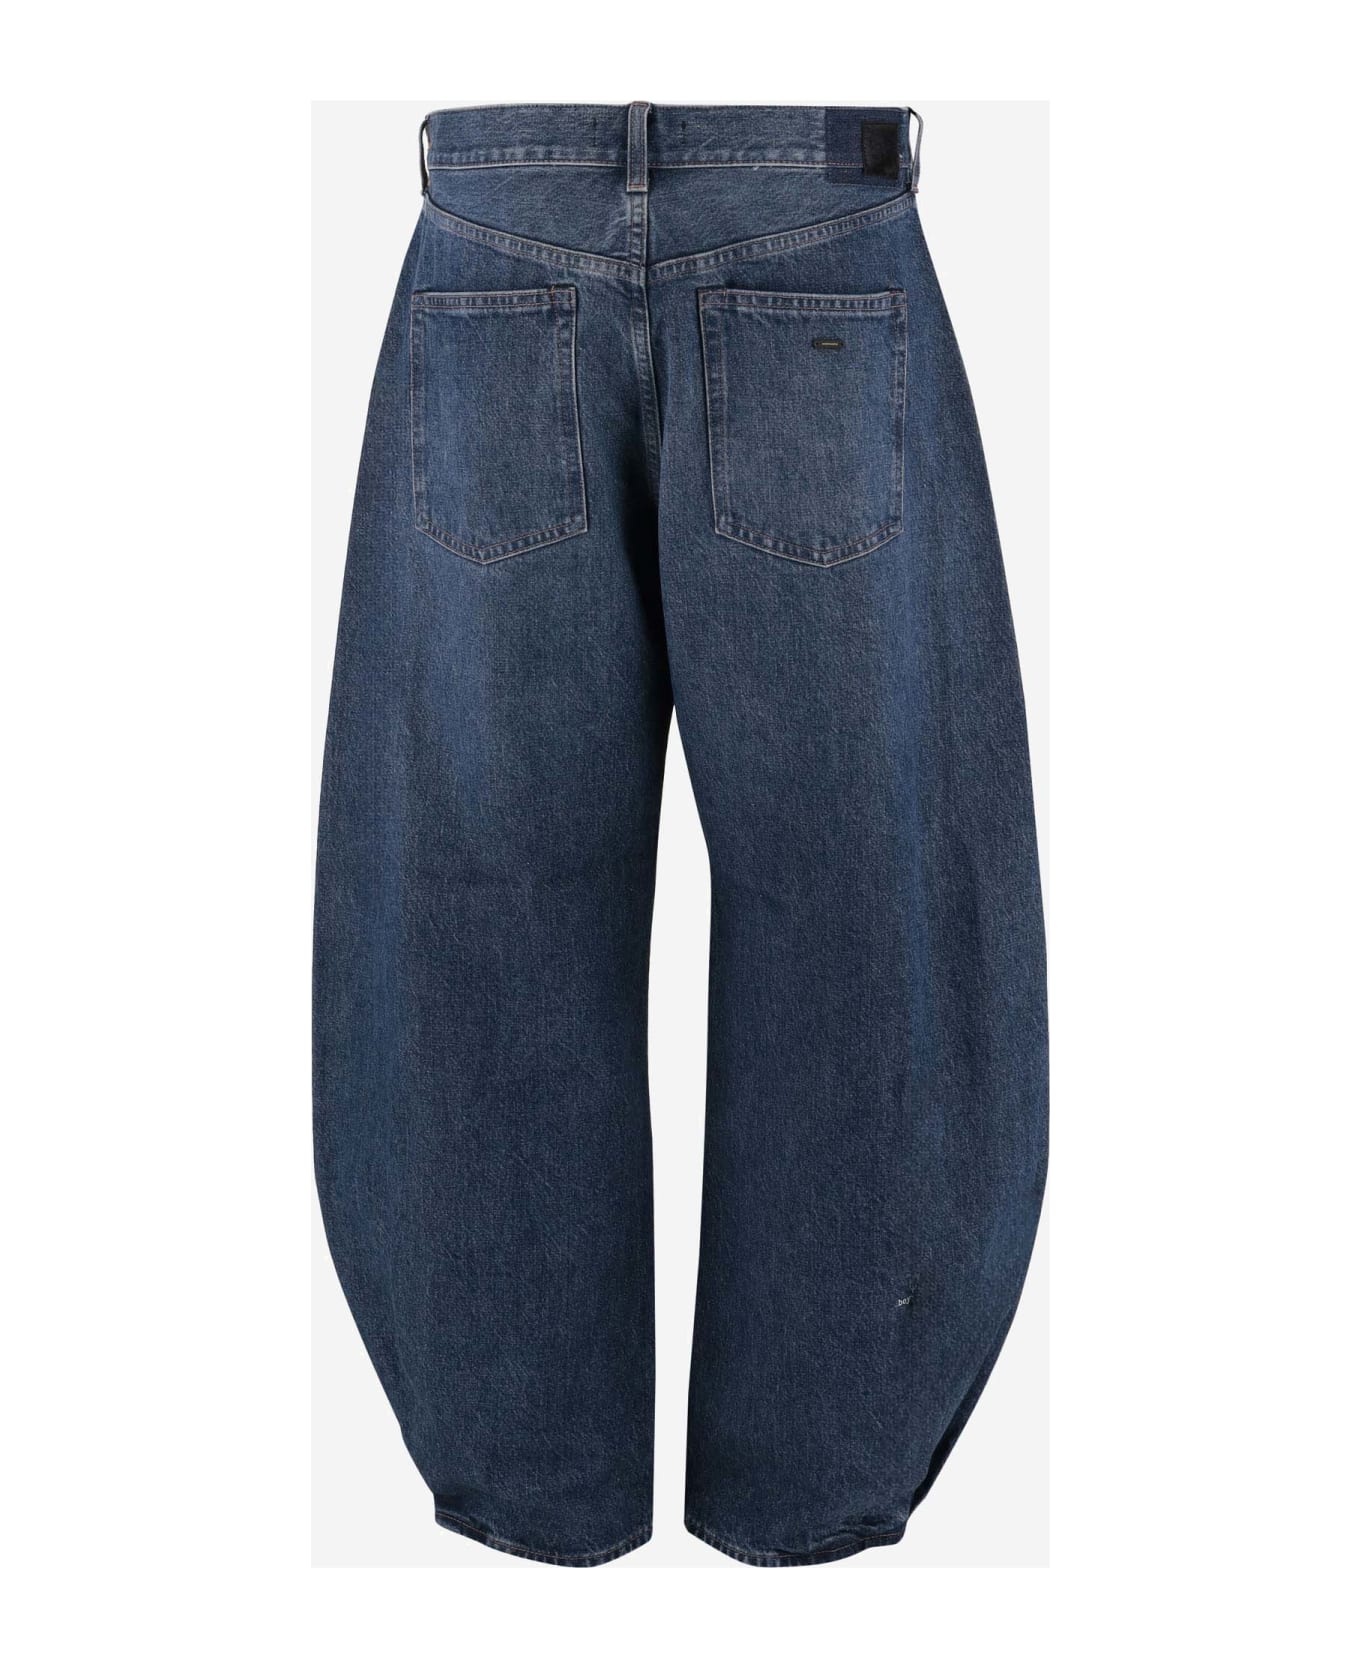 Made in Tomboy Cotton Denim Jeans - Blue